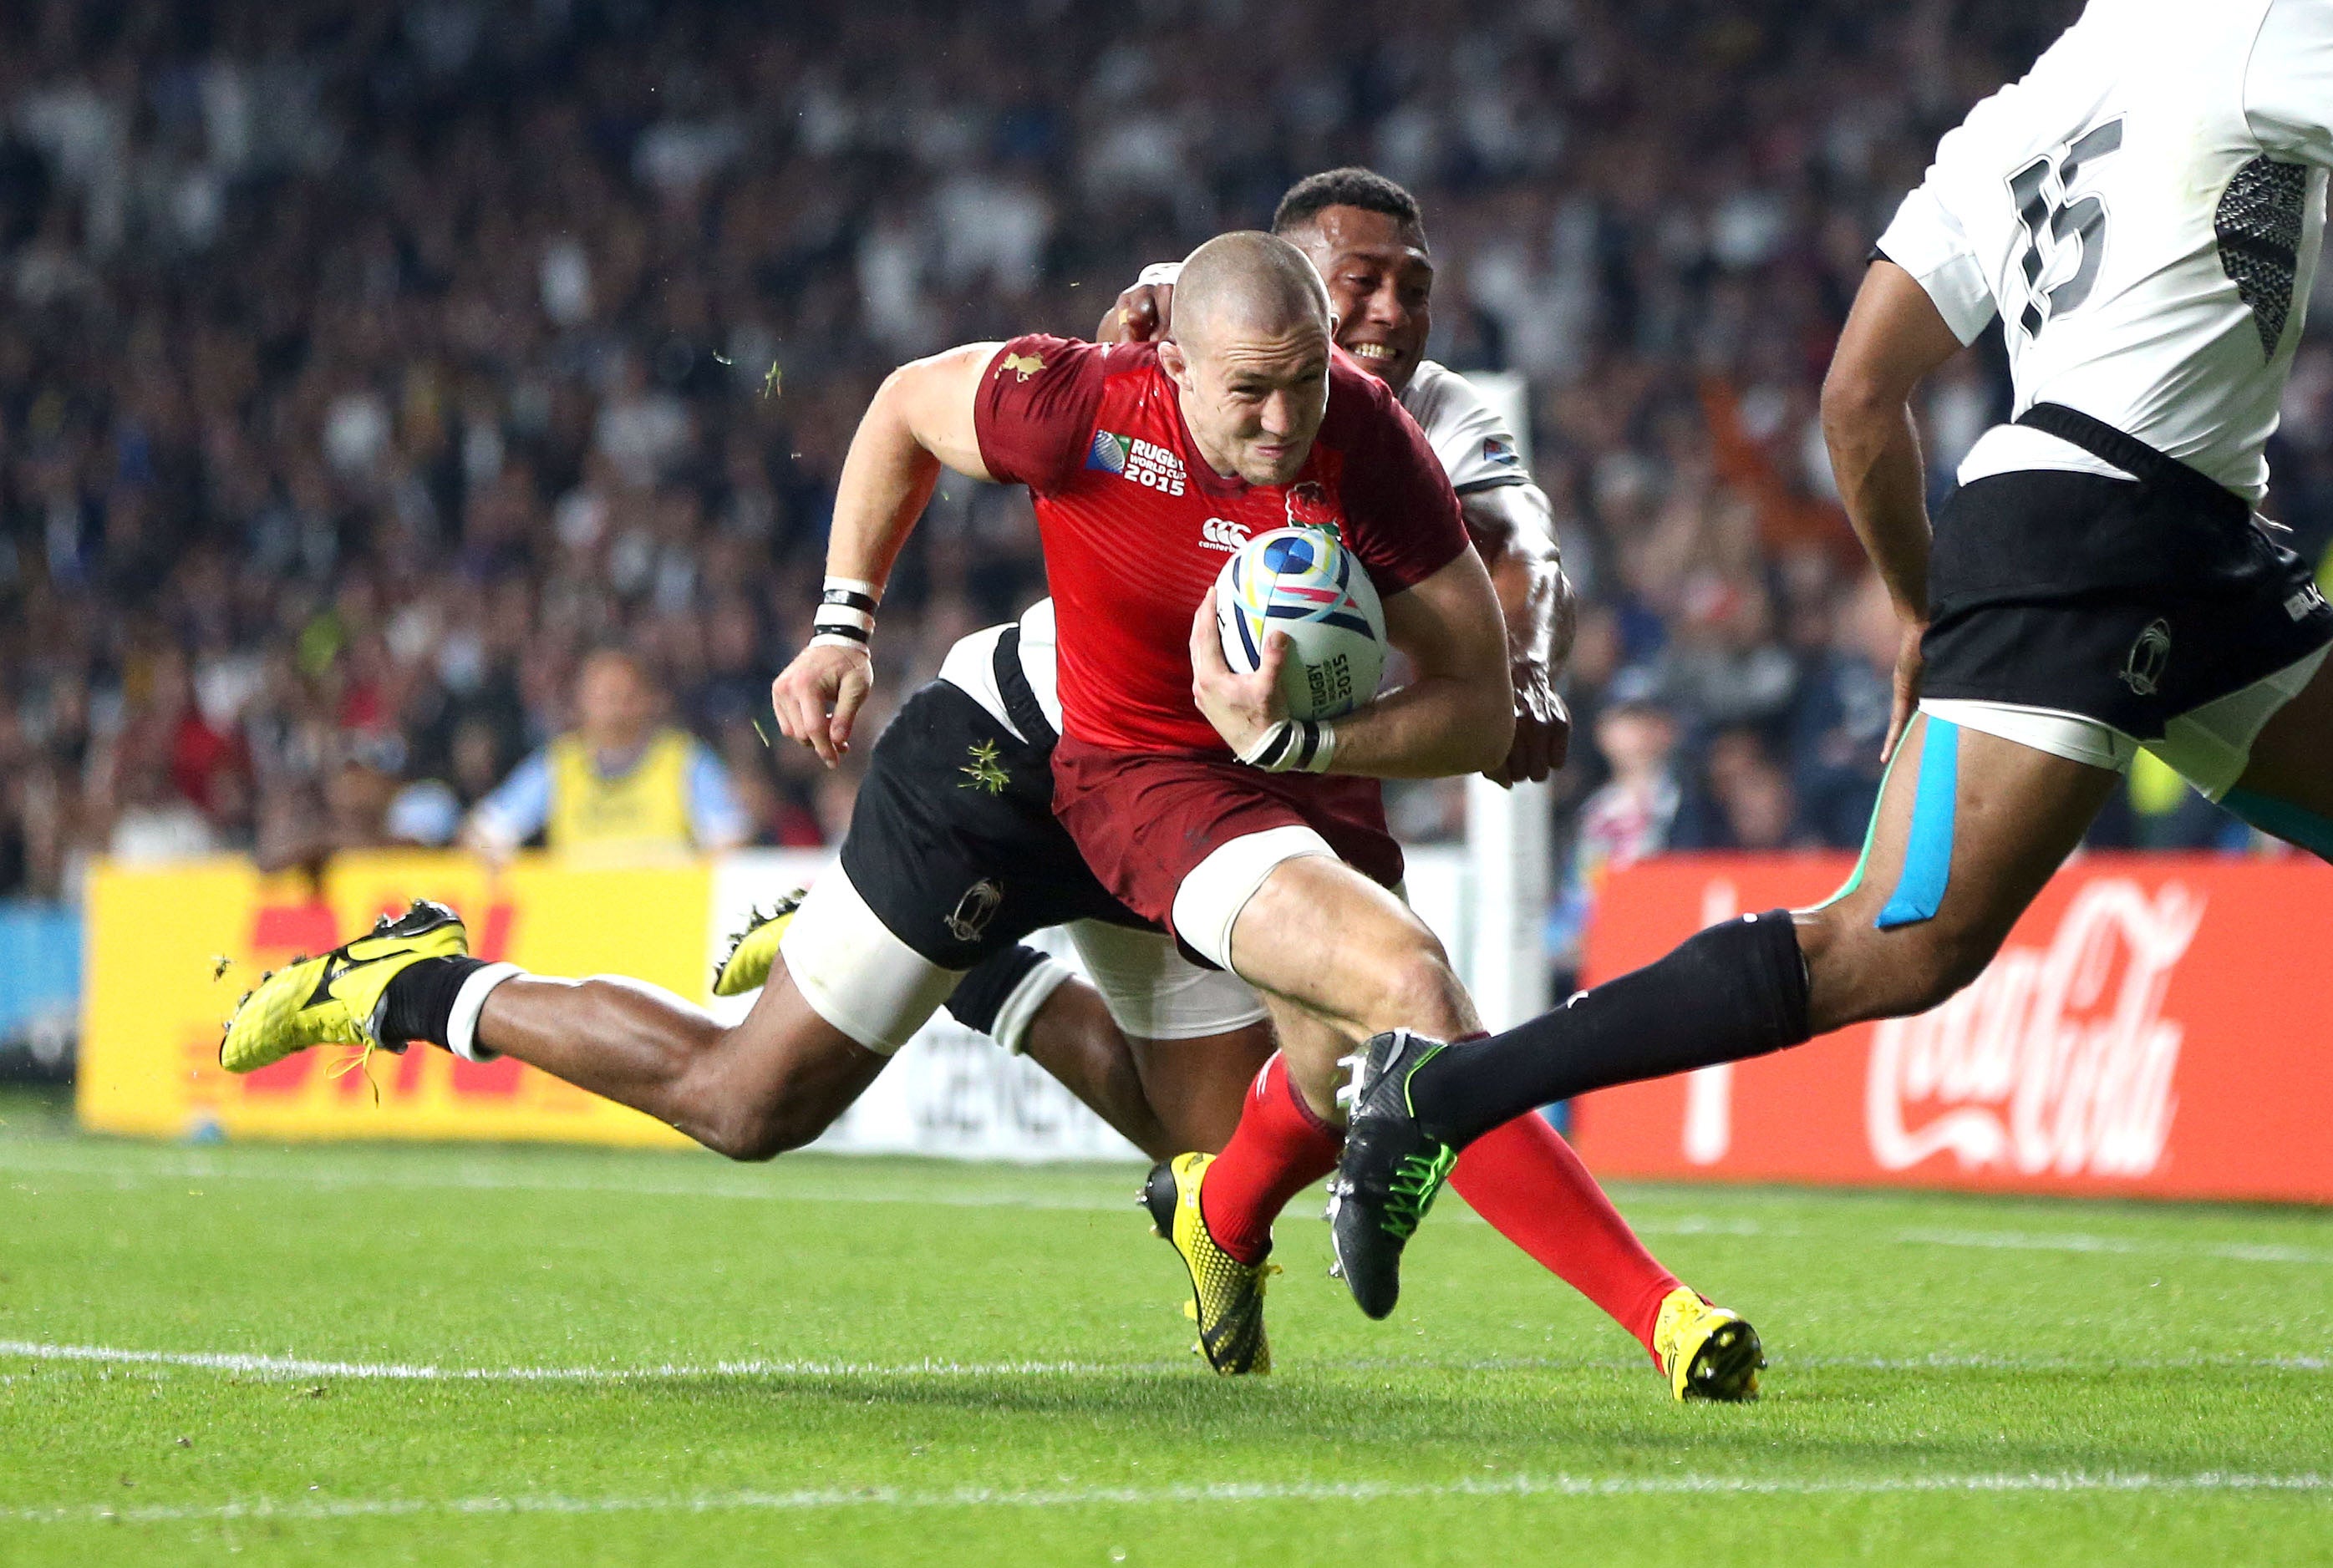 England's Mike Brown breaks the final Fiji tackle & scores the 2nd try Rugby World Cup England 2015